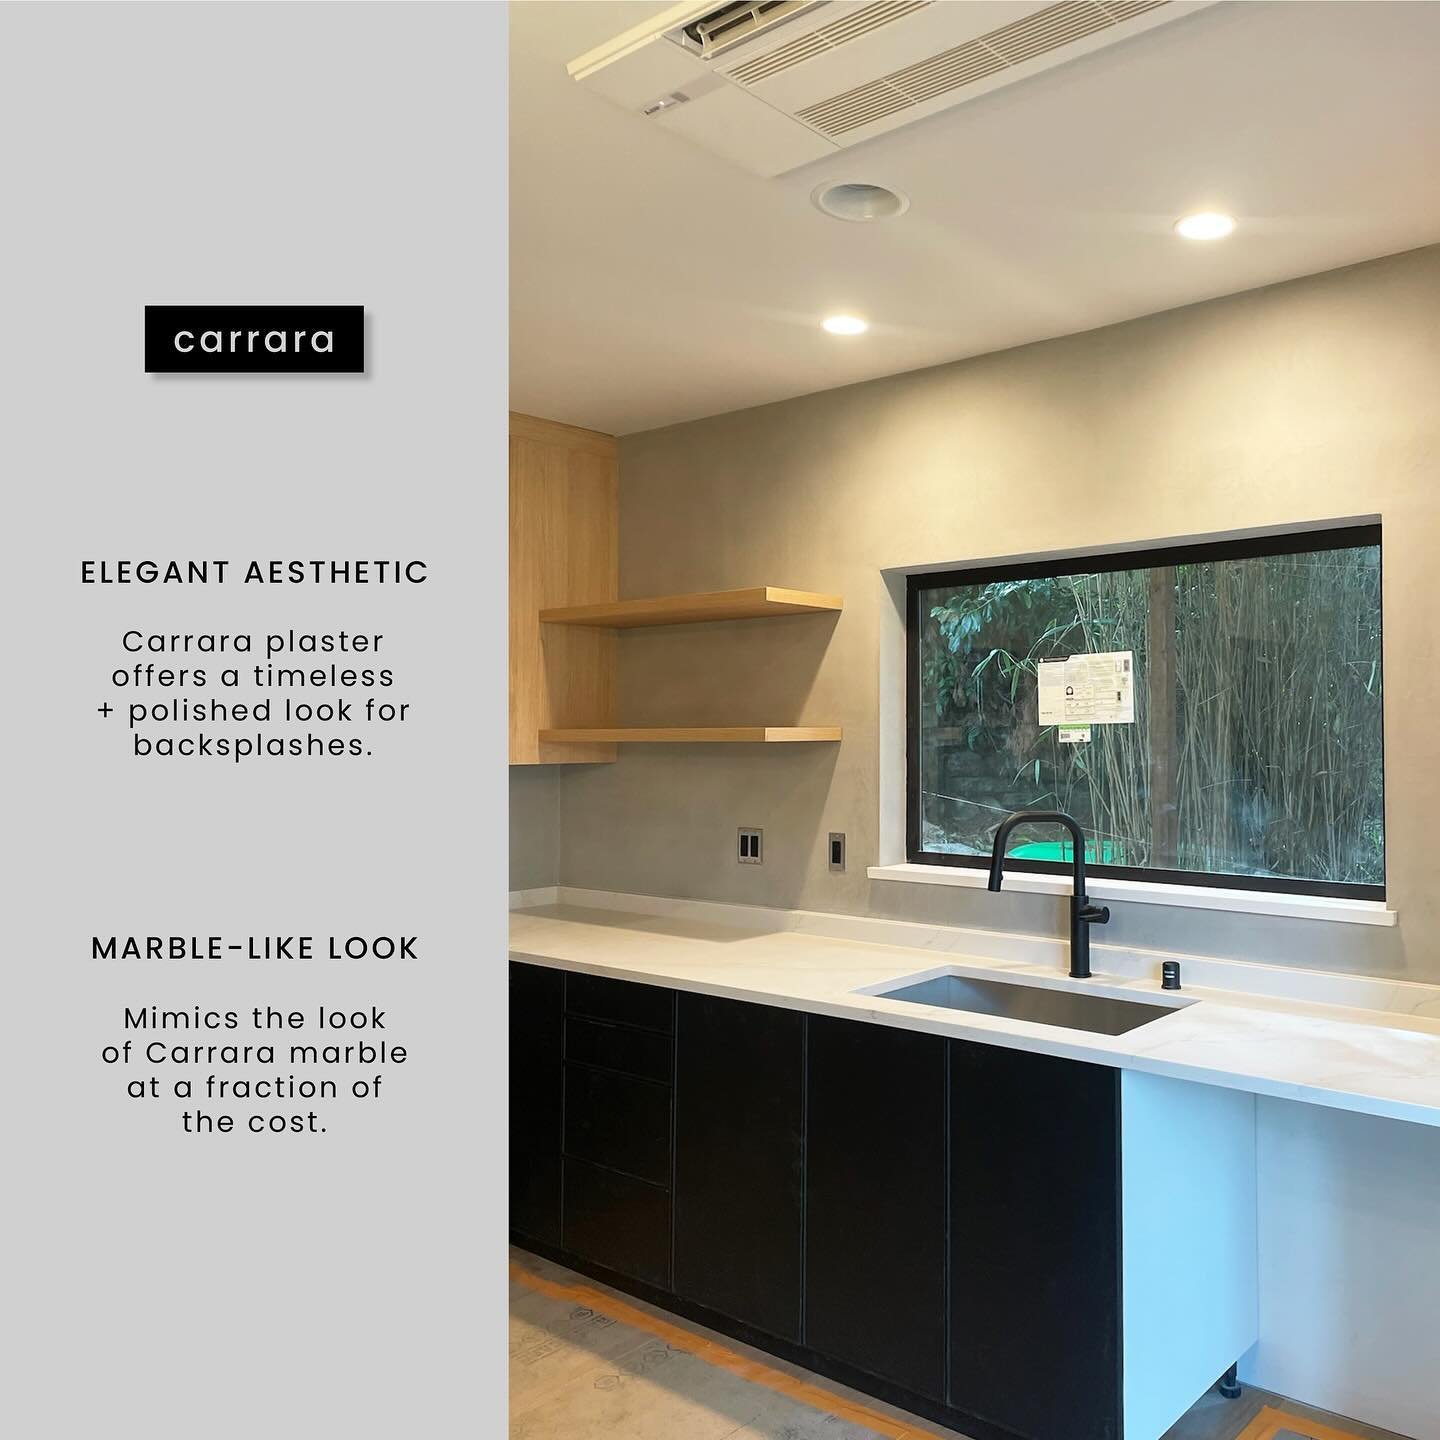 Transforming kitchens into a marble masterpiece with Carrara plaster&hellip; who needs real marble when you can have this stunning, environmentally friendly alternative?